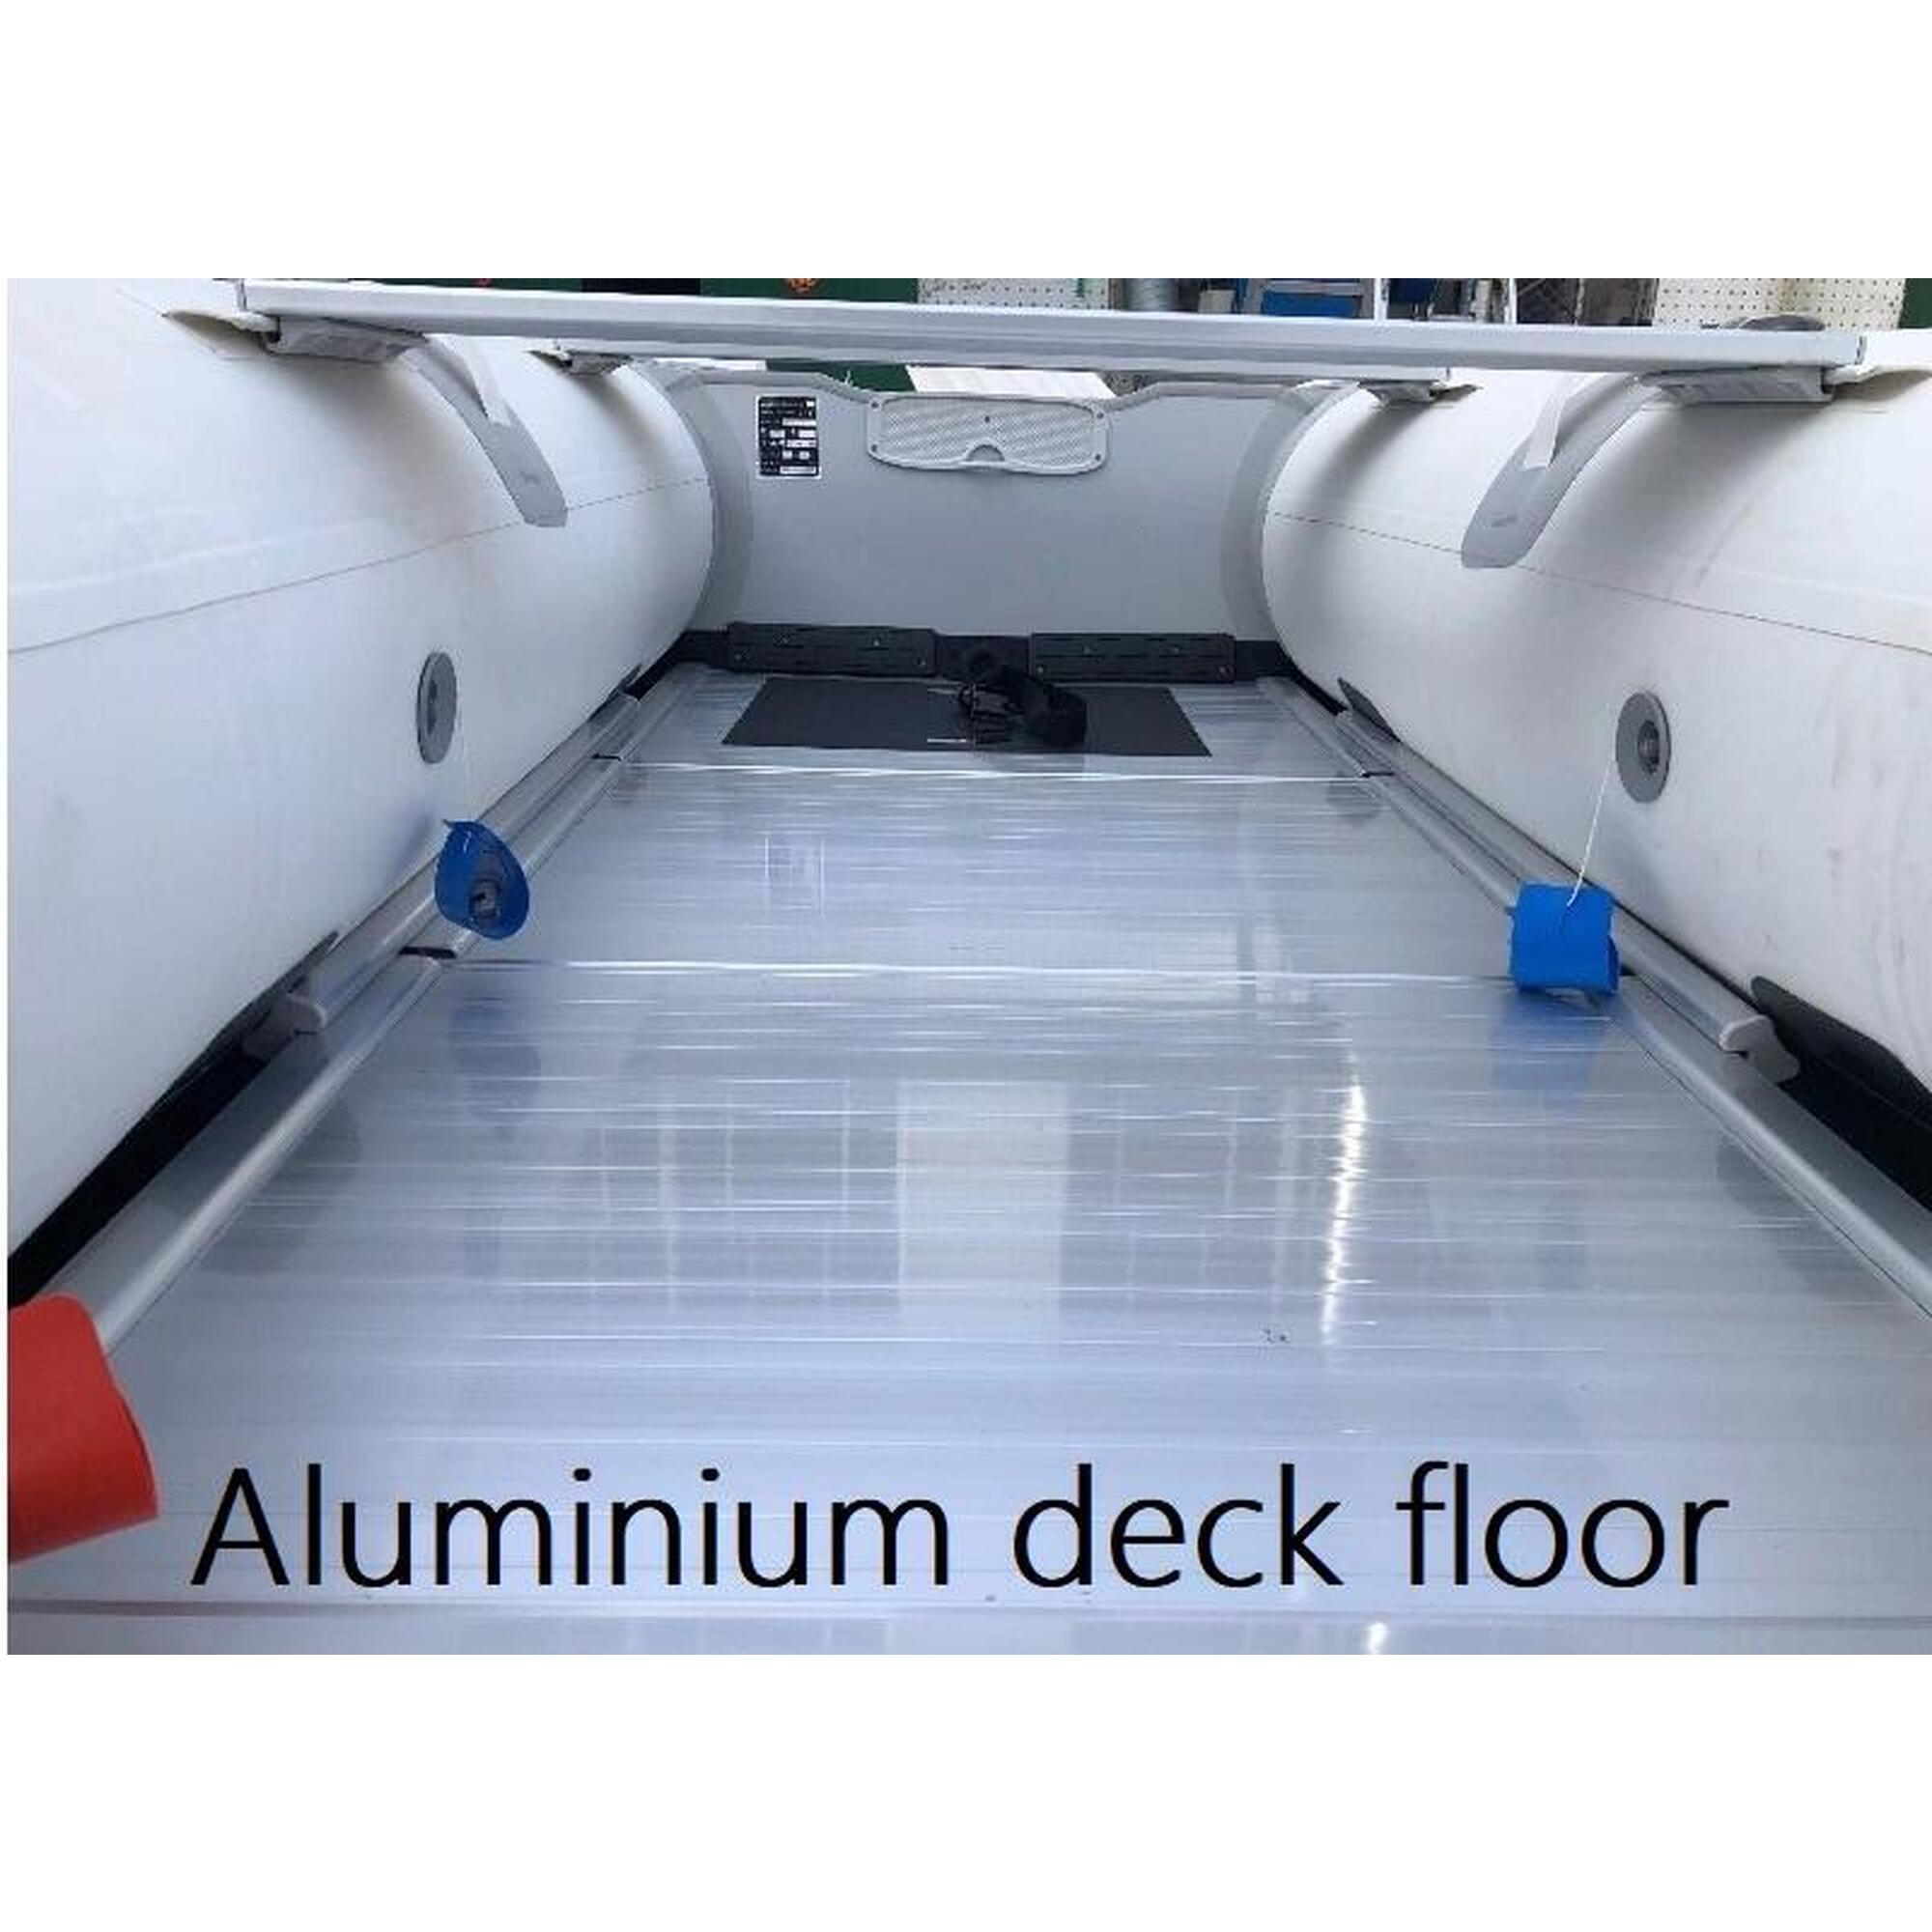 Inflatable Boat, Air Deck With Inflatable Keel (3.0M (L) X 1.2MM PVC) - Grey